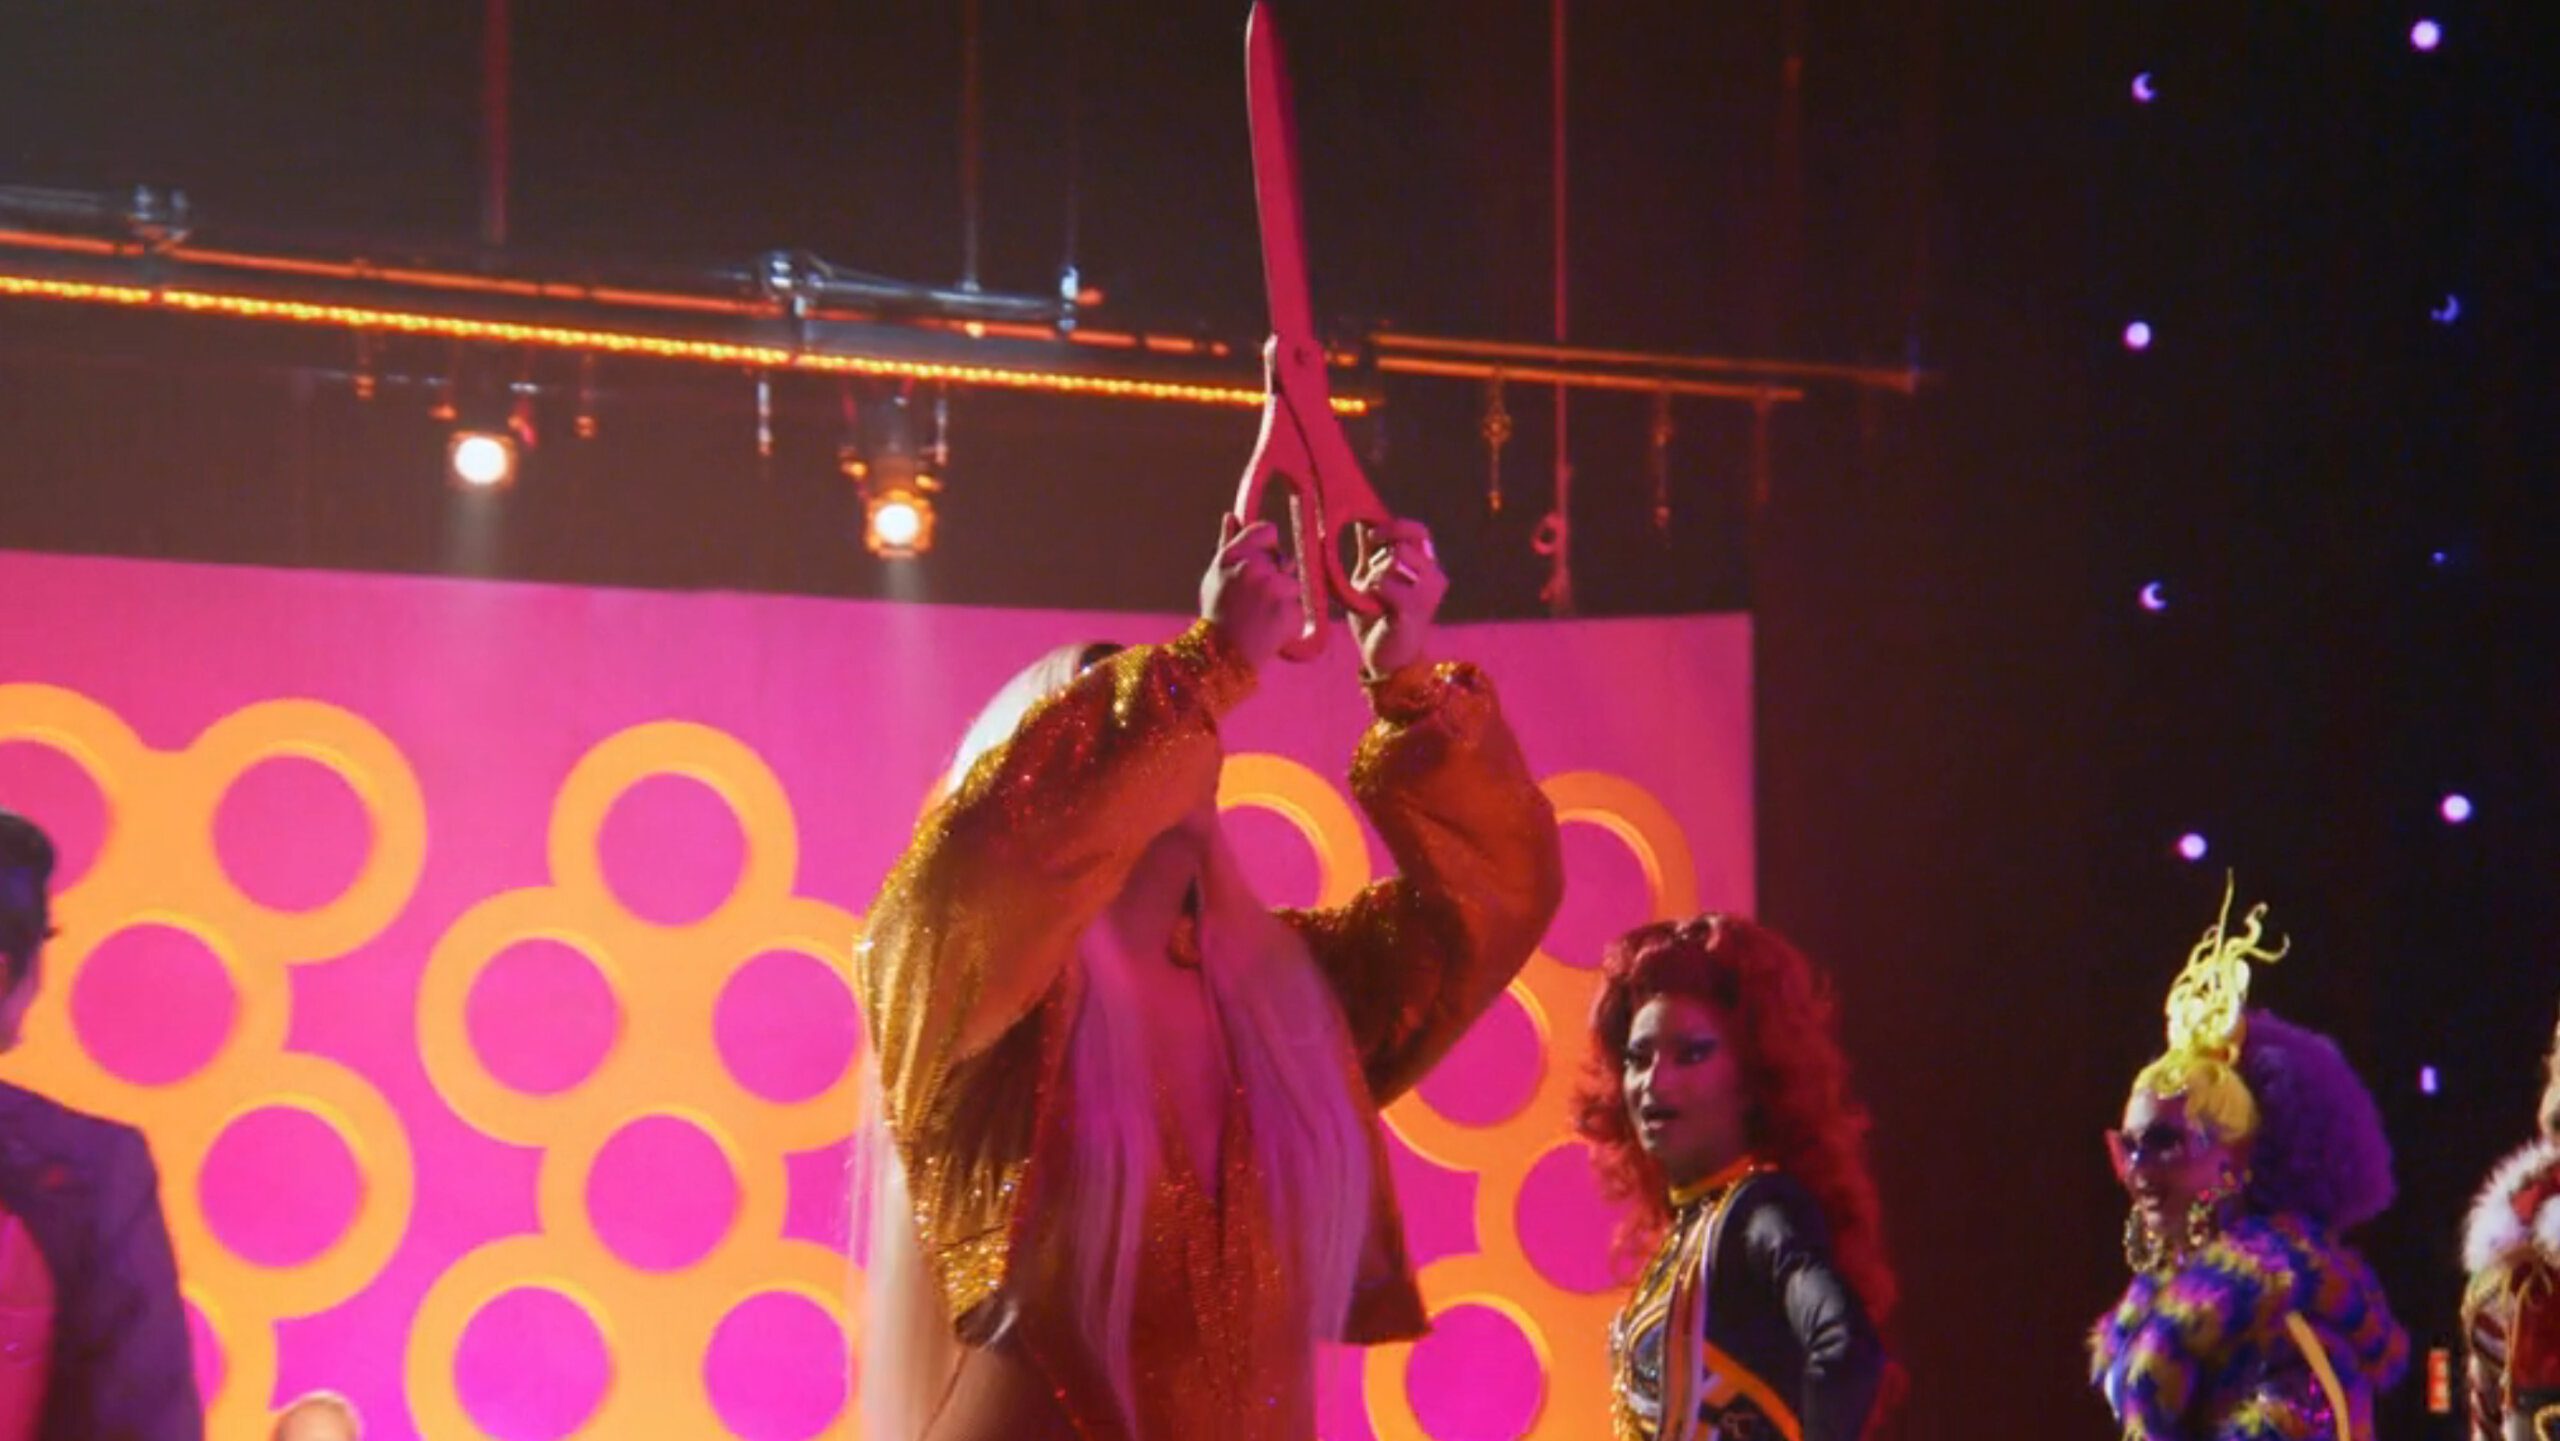 A performer in a glittering orange outfit holding oversized scissors above their head, surrounded by other vibrantly dressed individuals on stage with a pink background in a scene from RuPaul's Drag Race All-Stars Season 9 Episode 5.